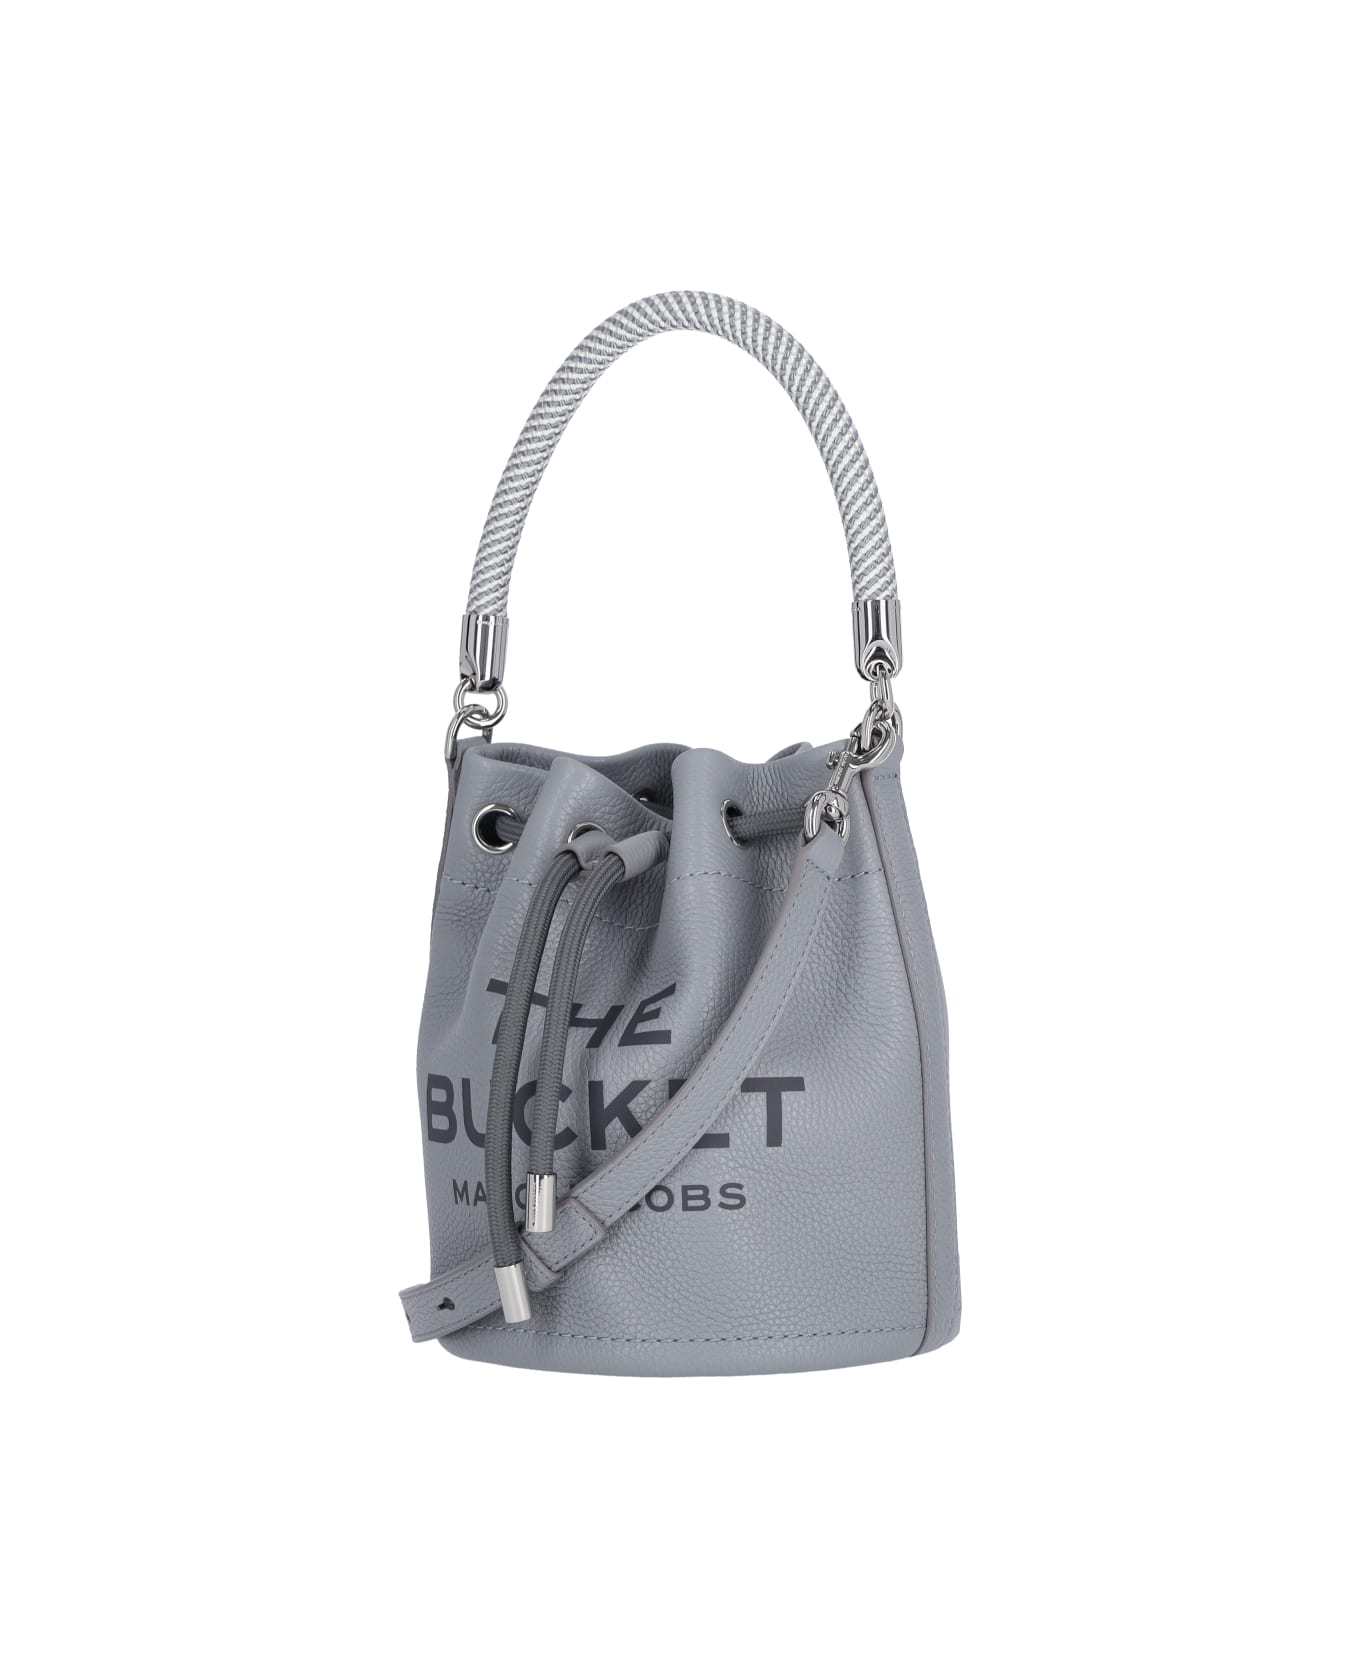 Marc Jacobs 'the Leather Bucket' Bag - Gray